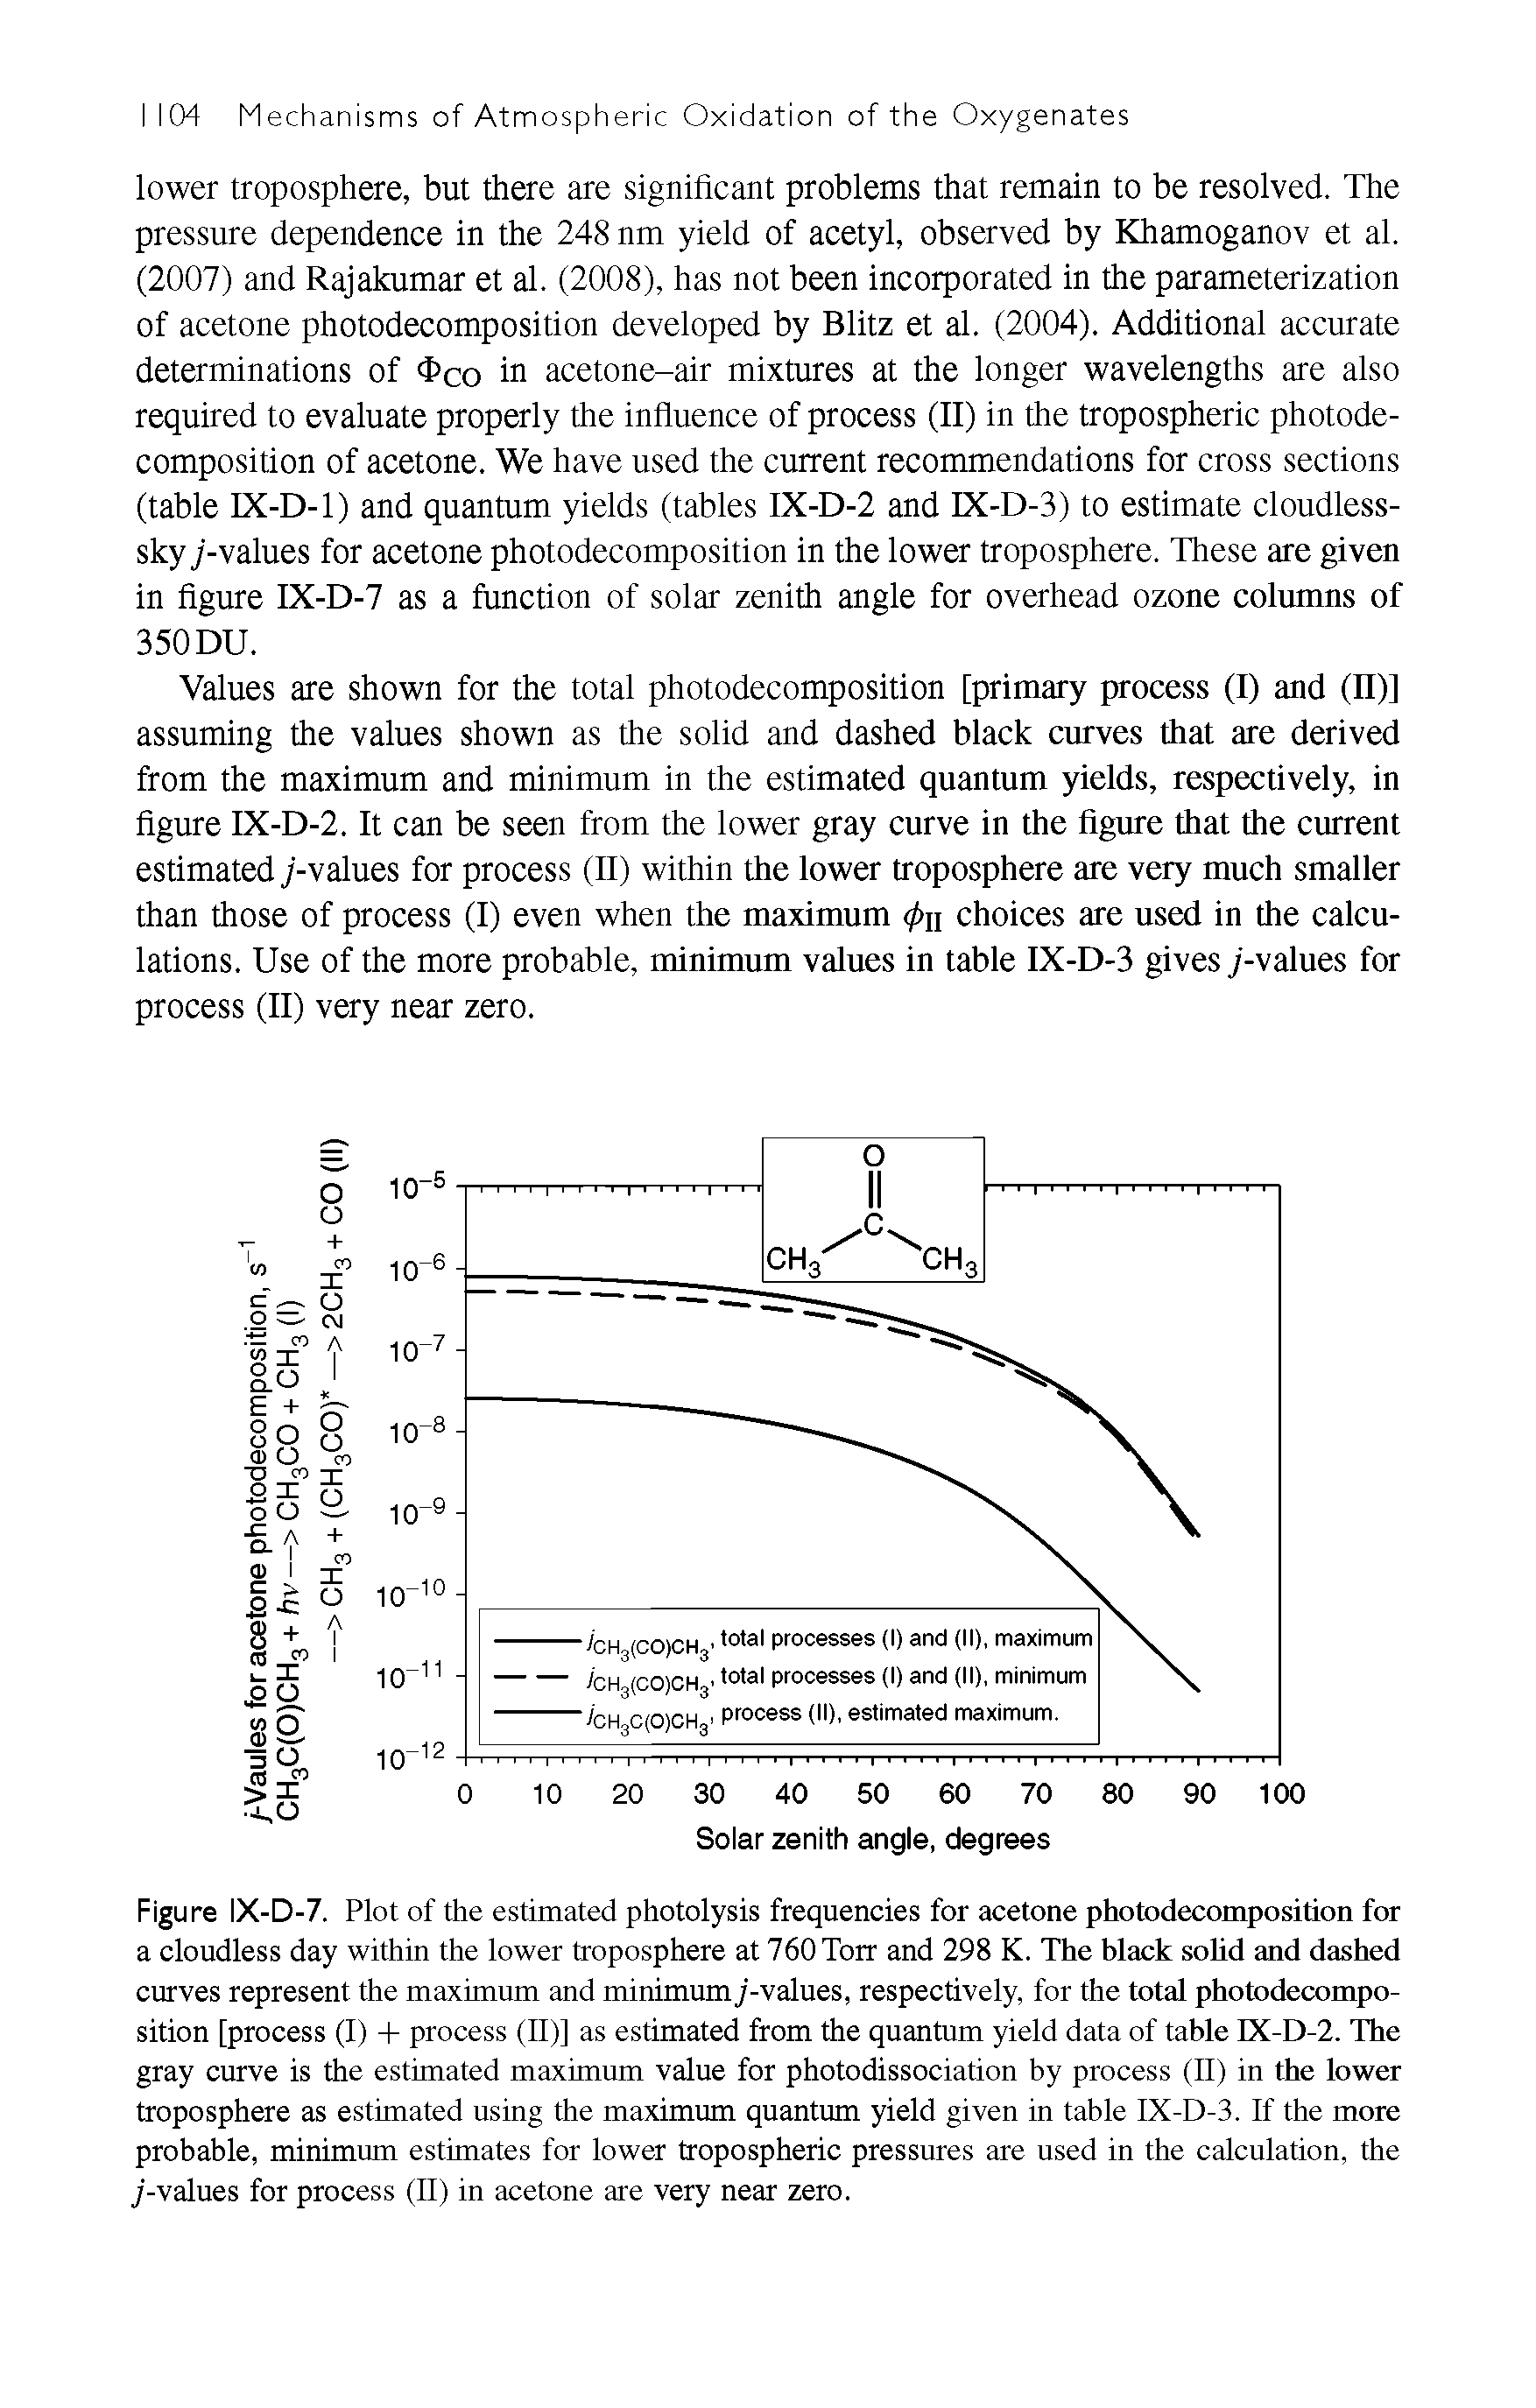 Figure IX-D-7. Plot of the estimated photolysis frequencies for acetone photodecomposition for a cloudless day within the lower troposphere at 760Torr and 298 K. The black solid and dashed curves represent the maximum and minimum / -values, respectively, for the total photodecomposition [process (I) 4- process (II)] as estimated from the quantum yield data of table IX-D-2. The gray curve is the estimated maximum value for photodissociation by process (II) in the lower troposphere as estimated using the maximum quantum yield given in table IX-D-3. If the more probable, minimum estimates for lower tropospheric pressures are used in the calculation, the / -values for process (II) in acetone are very near zero.